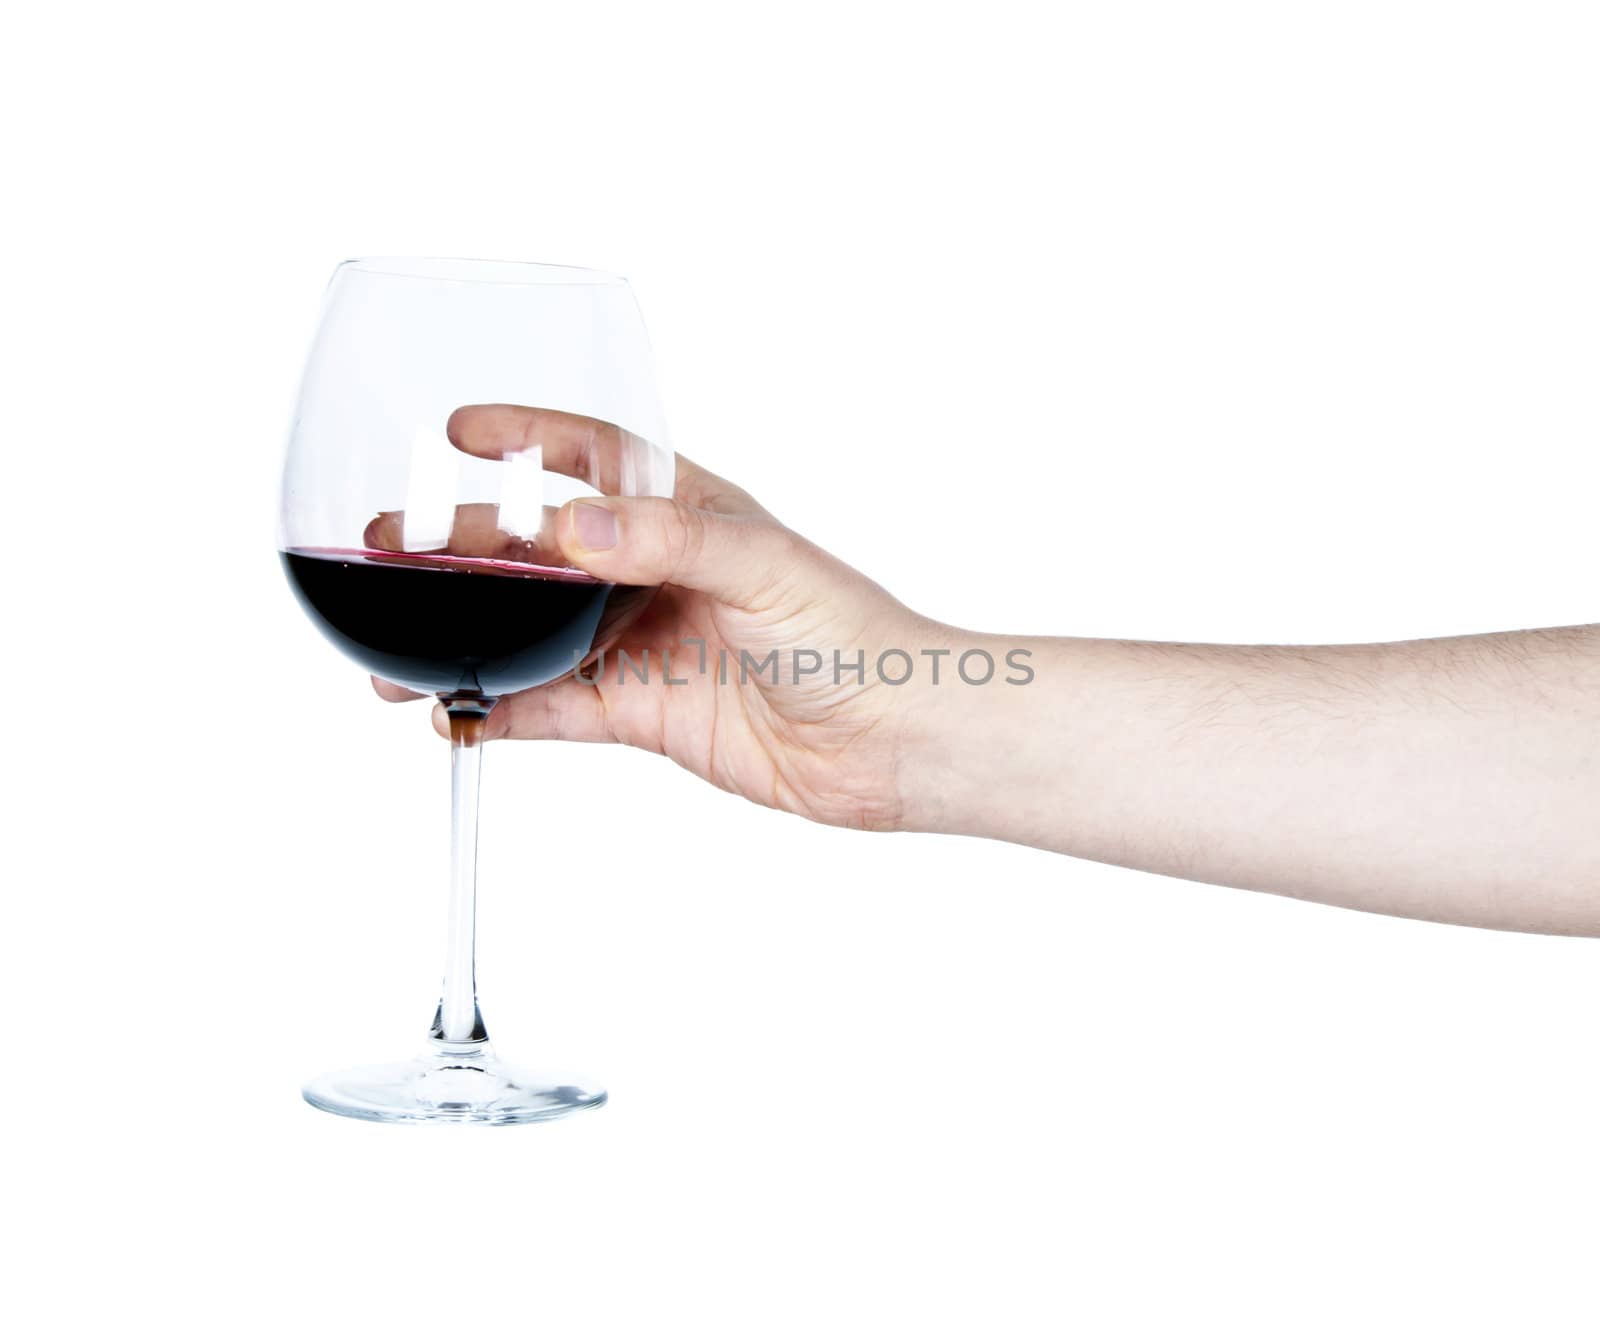 Isolated image of hand holding a glass of red wine on white